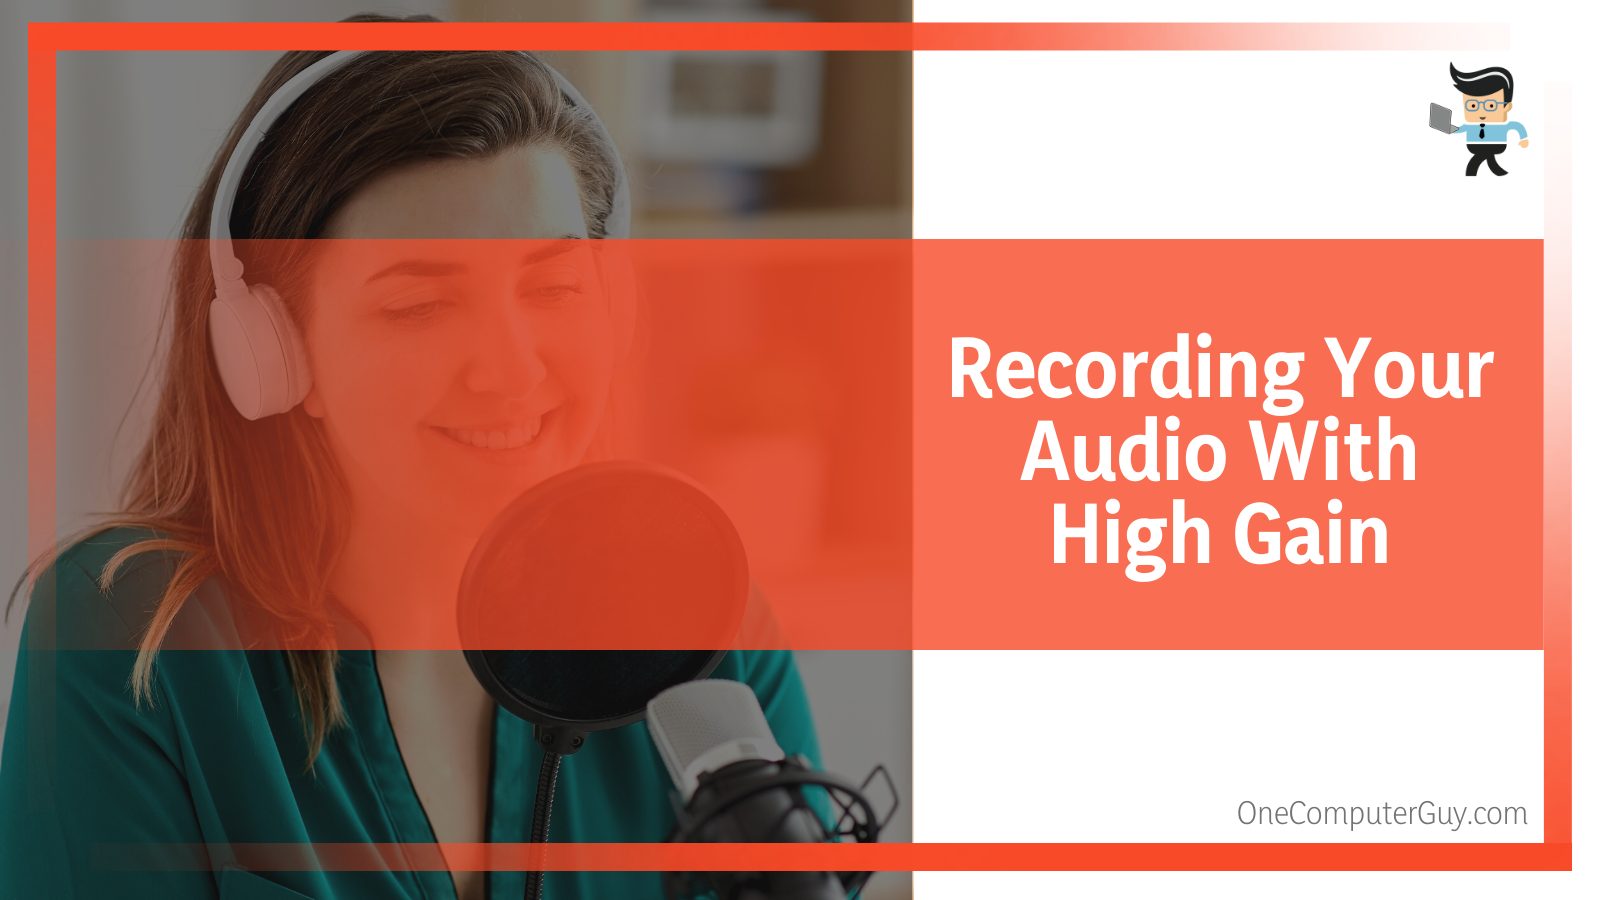 Recording Your Audio With High Gain